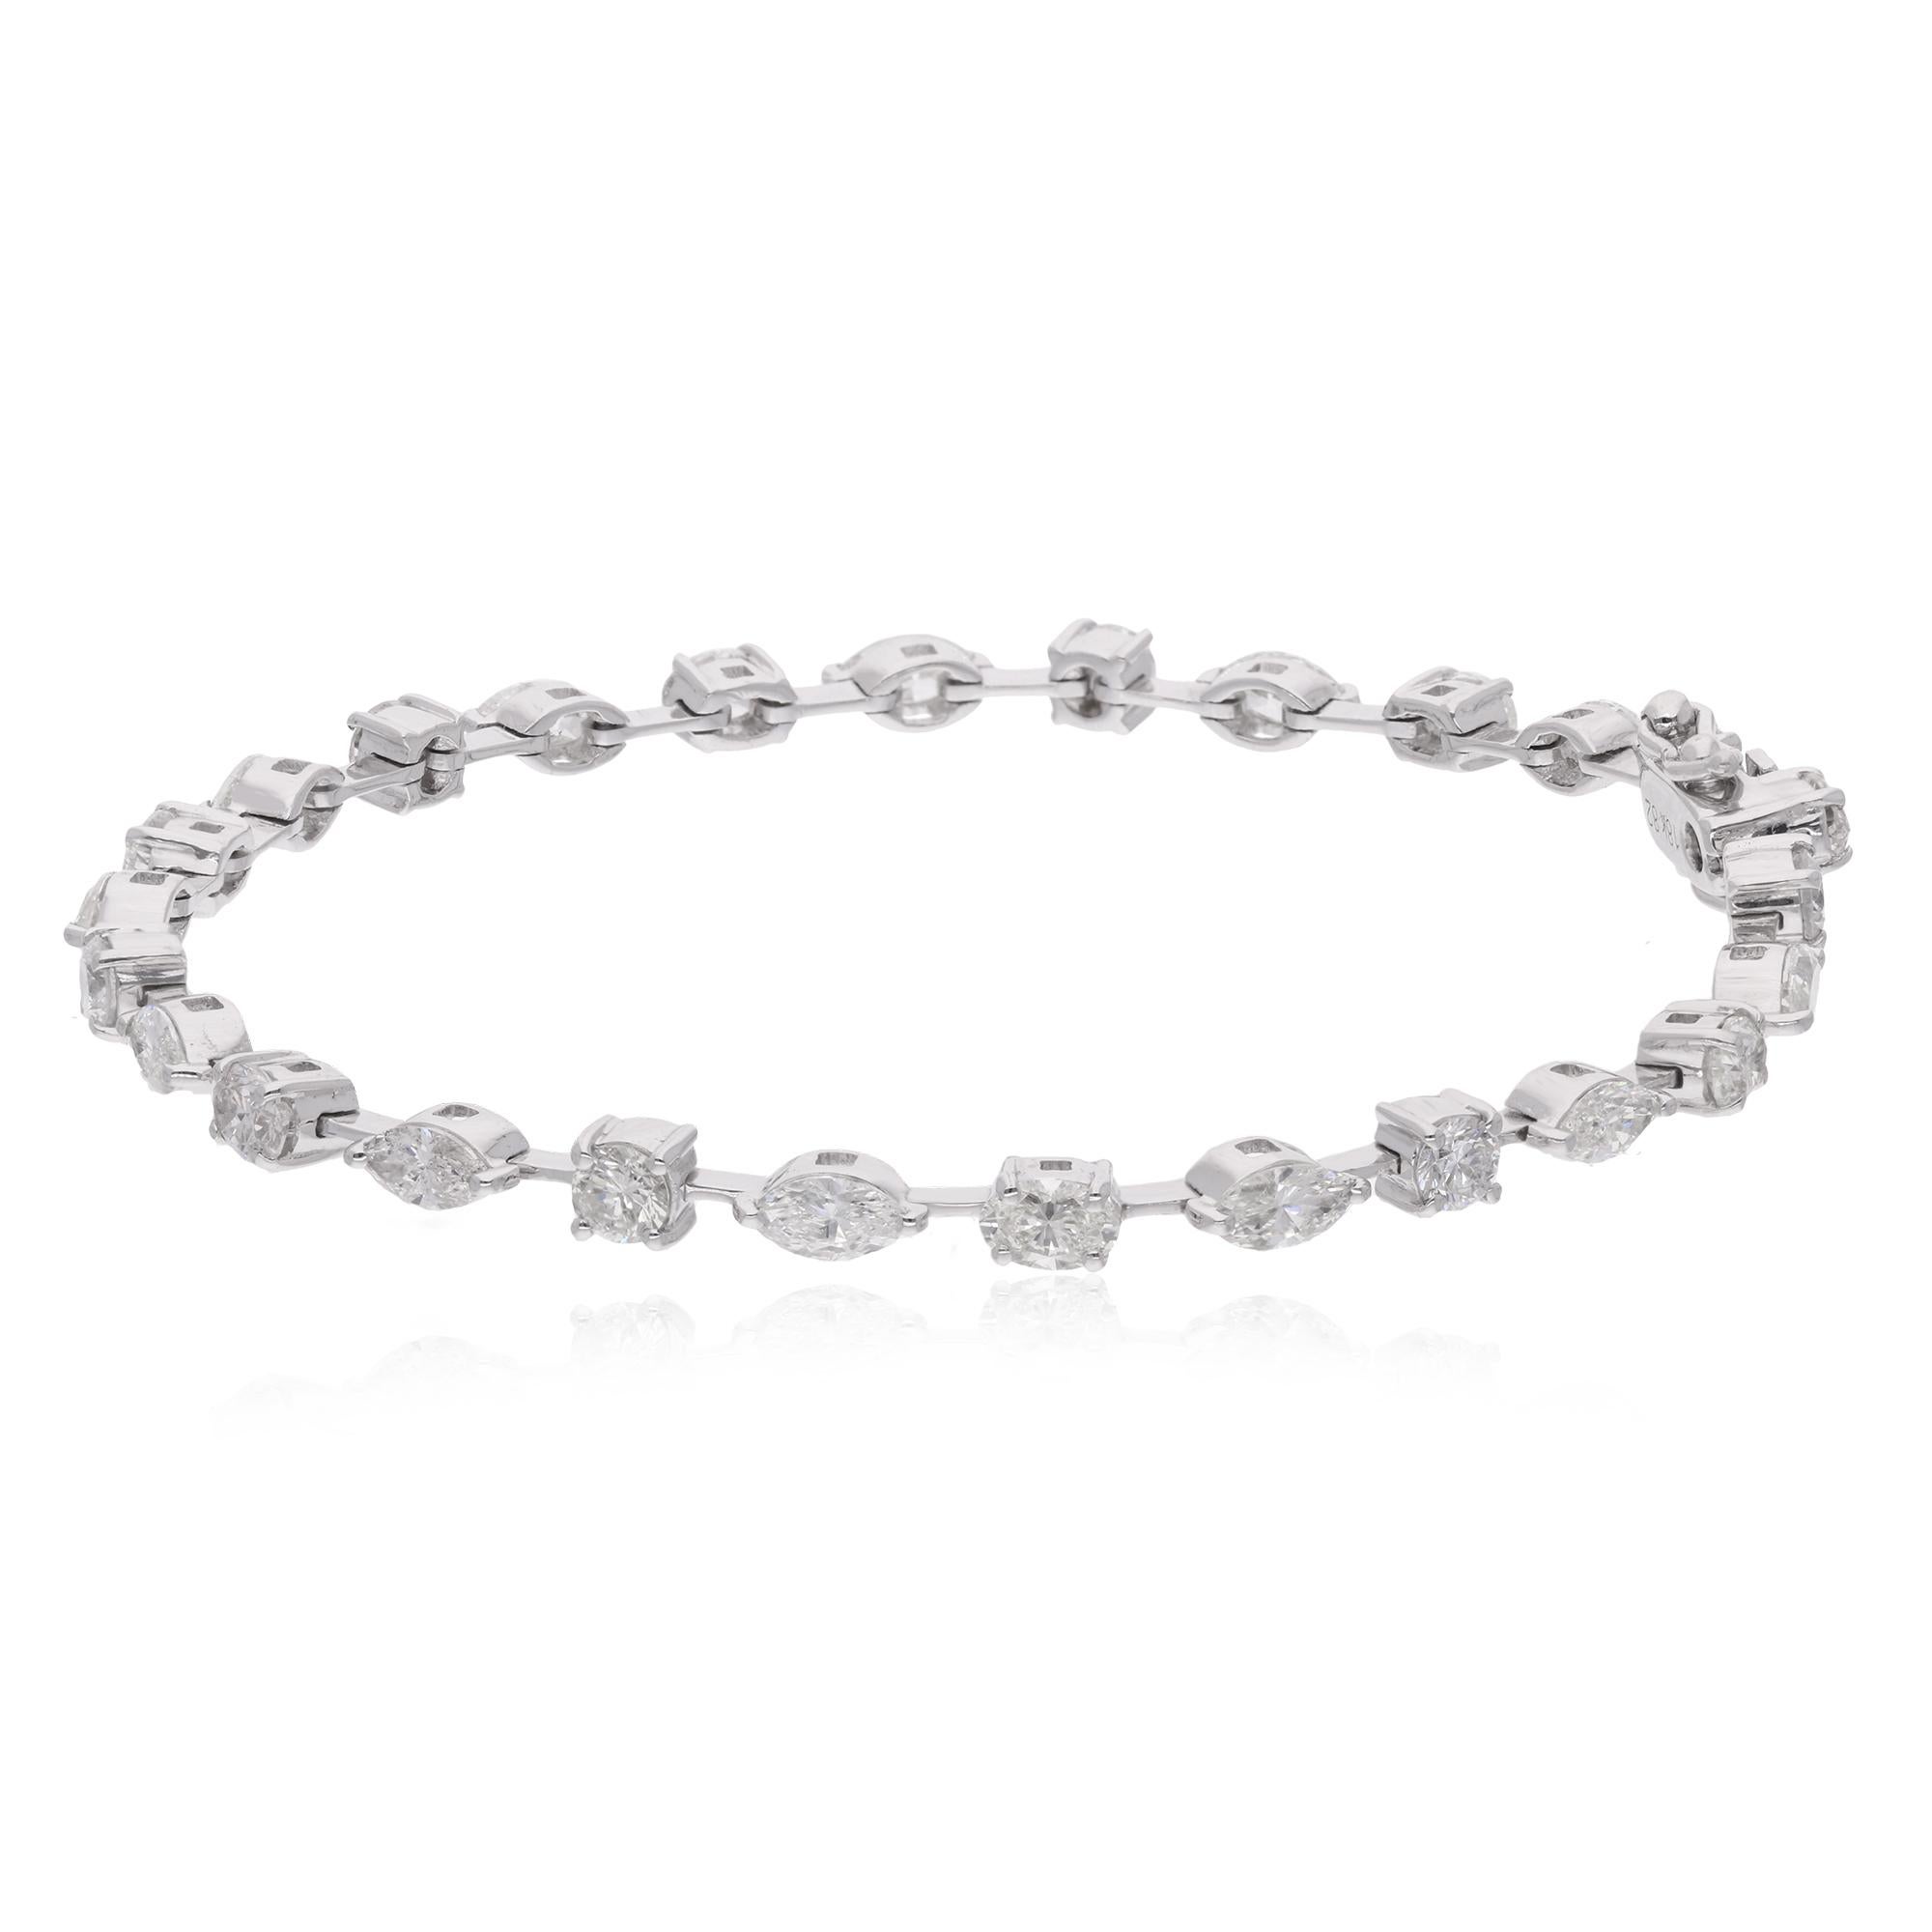 Item Code :- SEBR-41760A
Gross Wt. :- 9.86 gm
18k White Gold Wt. :- 8.94 gm
Natural Diamond Wt. :- 4.60 Ct.  ( AVERAGE DIAMOND CLARITY SI1-SI2 & COLOUR H-I )
Bracelet Length :- 7 Inches Long

✦ Sizing
.....................
We can adjust most items